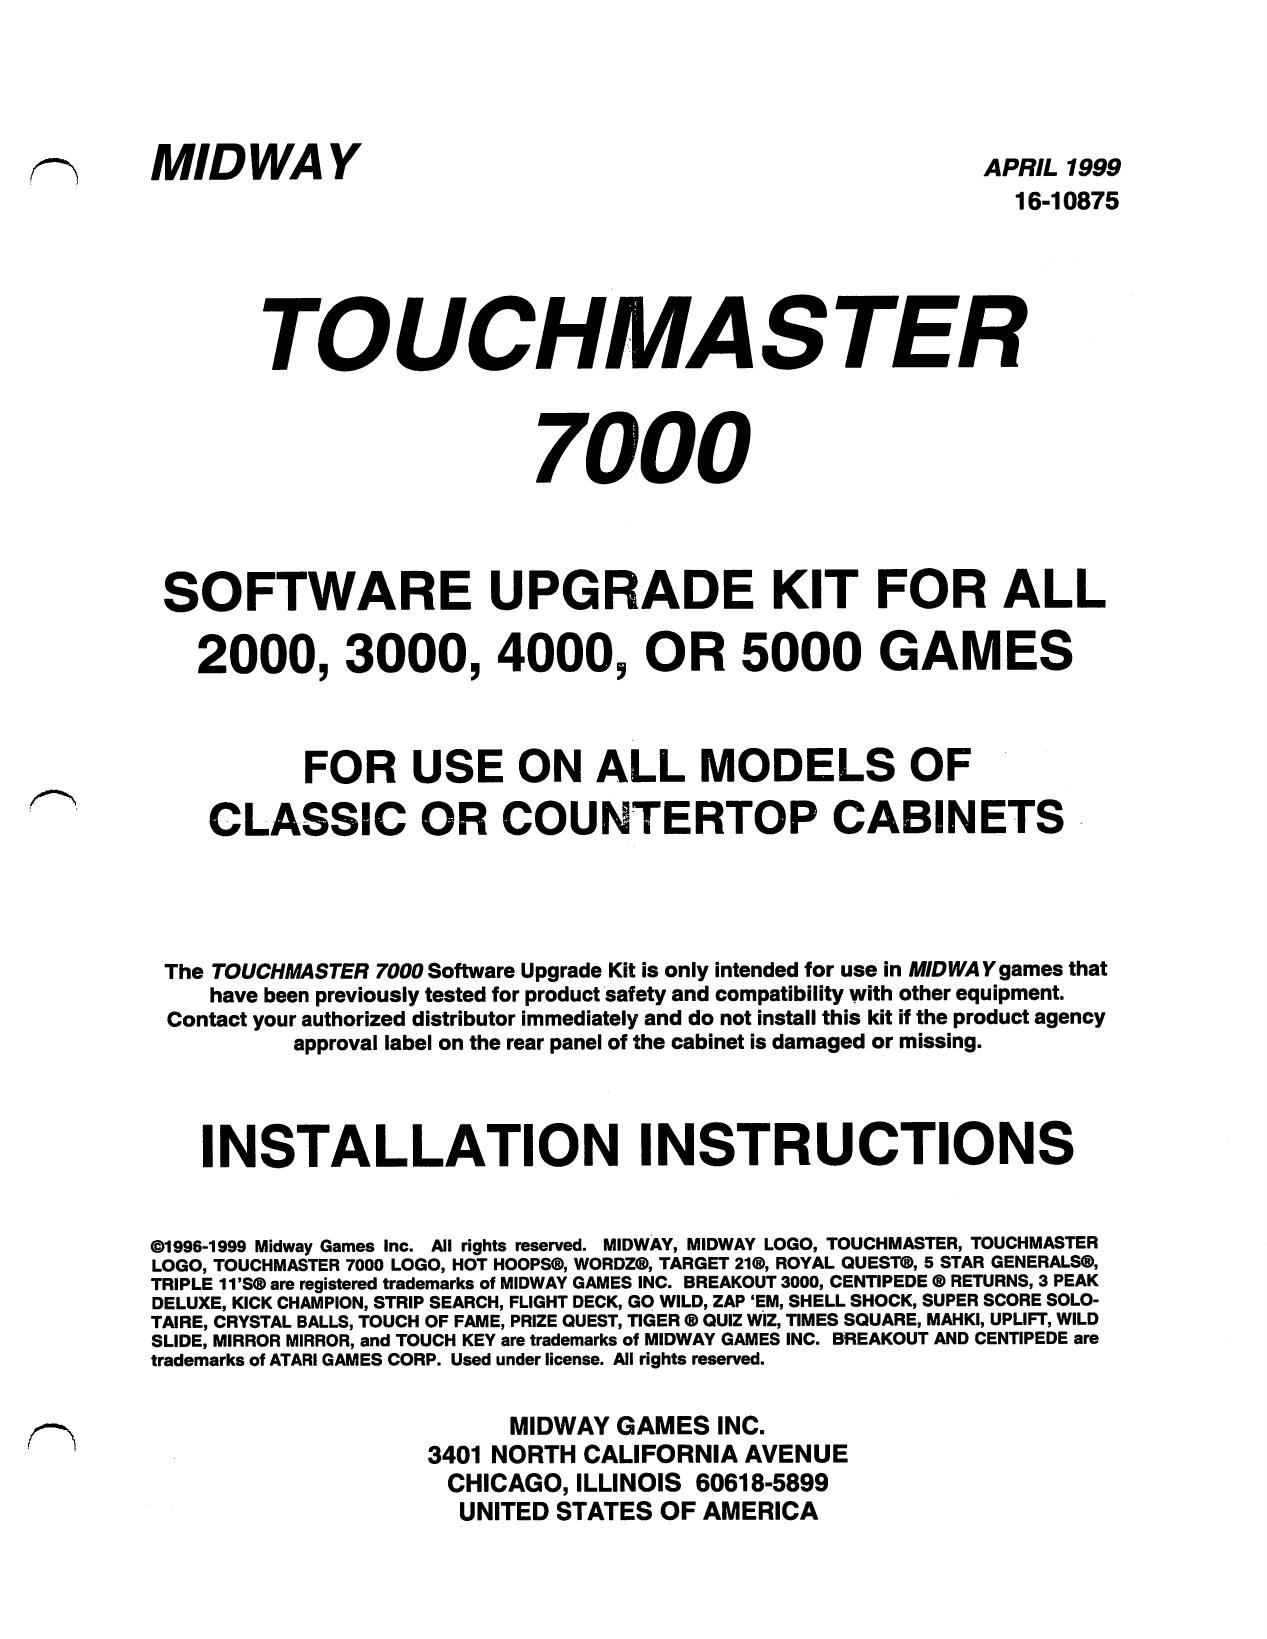 Touchmaster 7000 Software Upgrade April 1999 (16-10875)